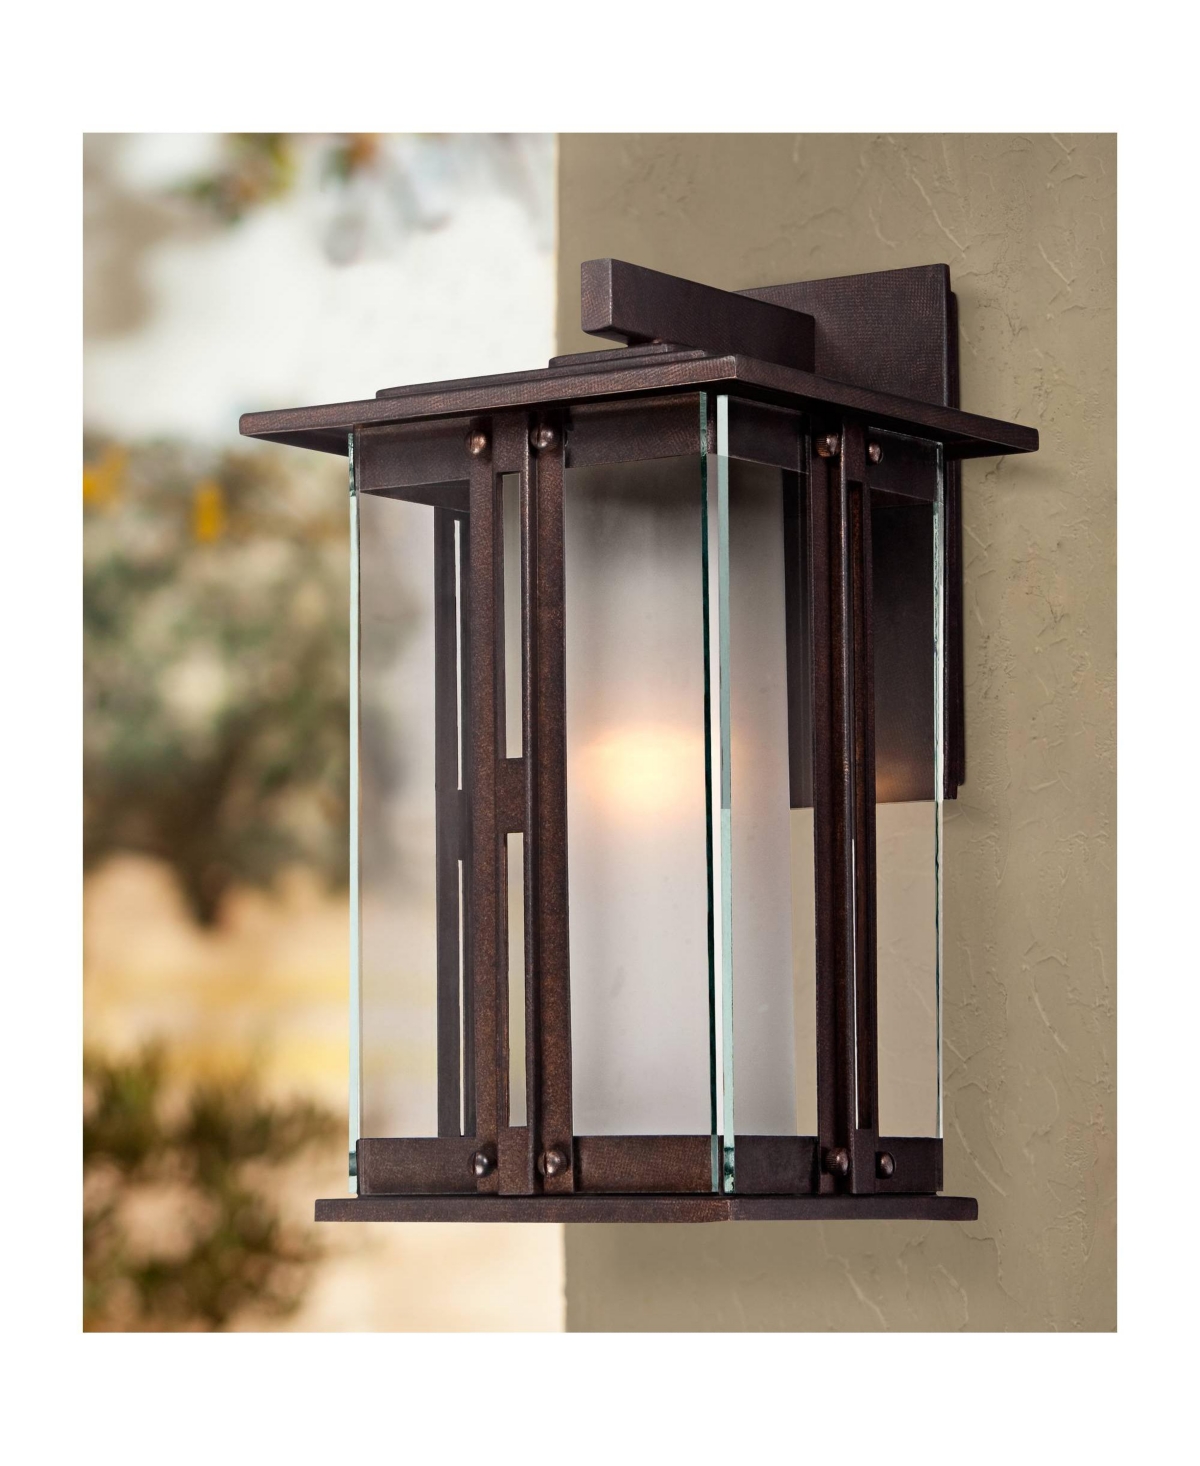 Fallbrook Rustic Farmhouse Mission Outdoor Wall Light Fixture Bronze 13" Clear Frosted Glass Shades for Exterior Barn Deck House Porch Yard Patio Outs